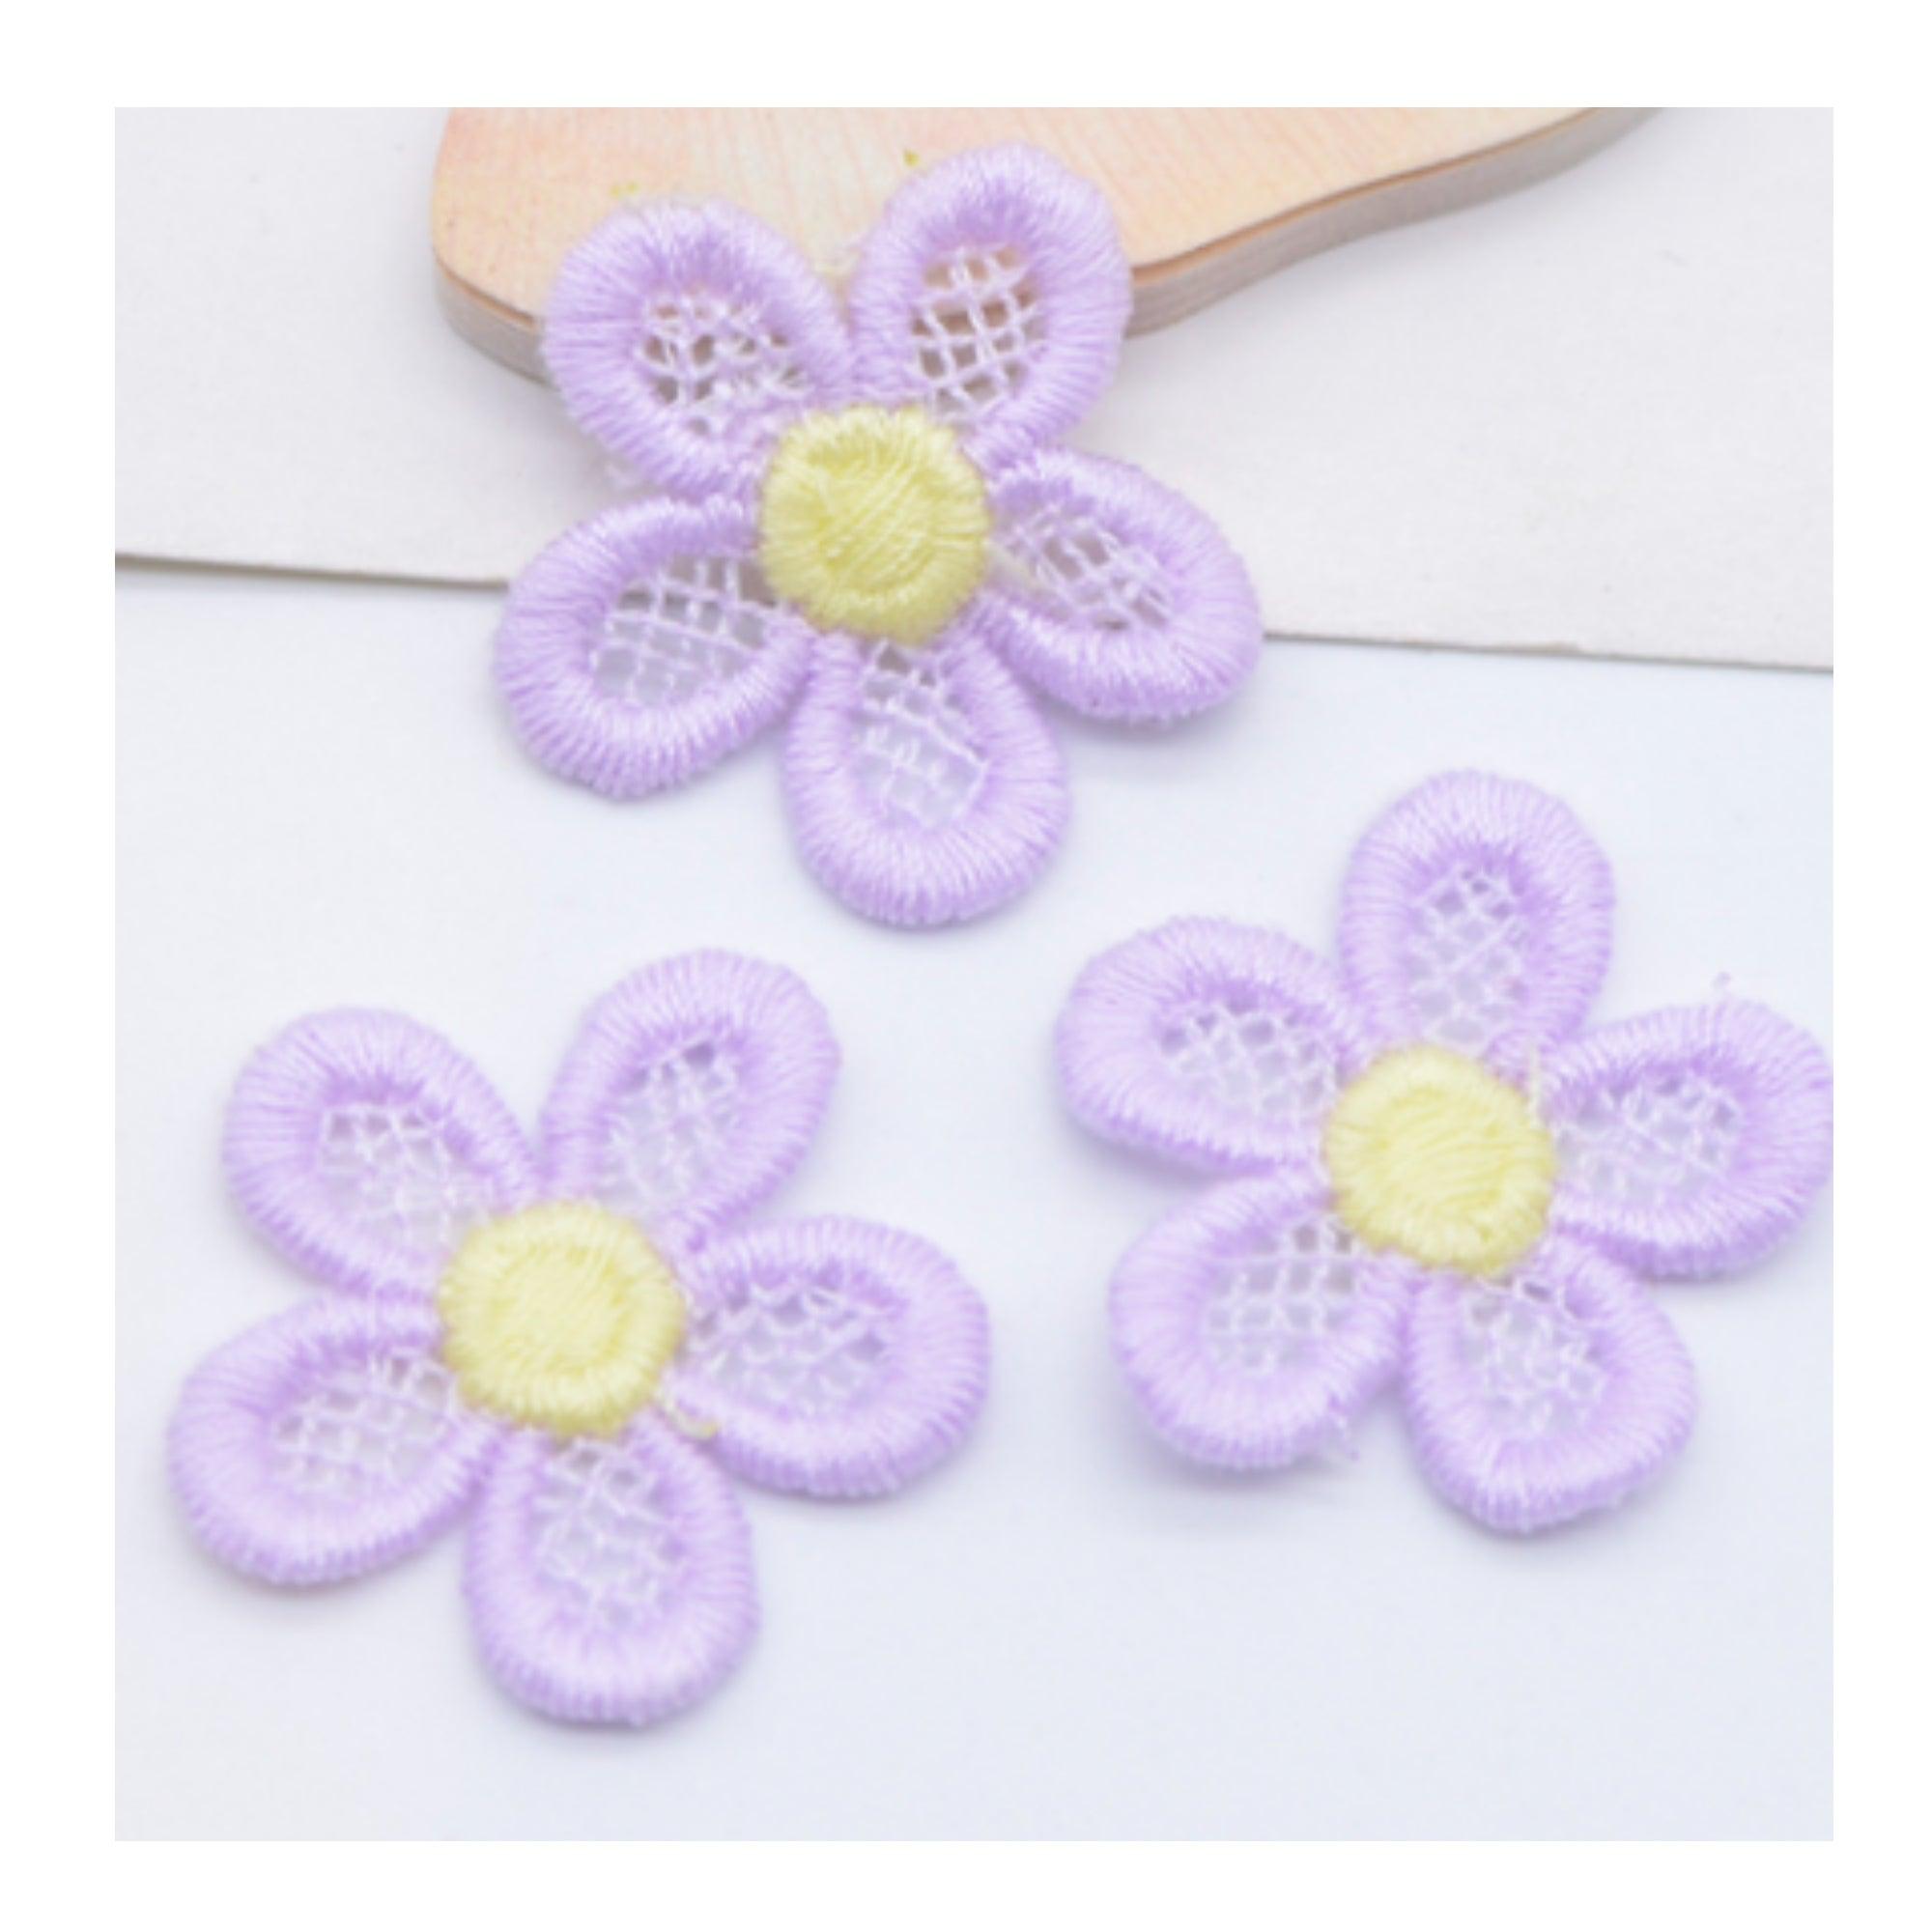 Embroidered Daisies Collection Purple & Yellow 1" Scrapbook Flower Embellishments by SSC Designs - 10 Pieces